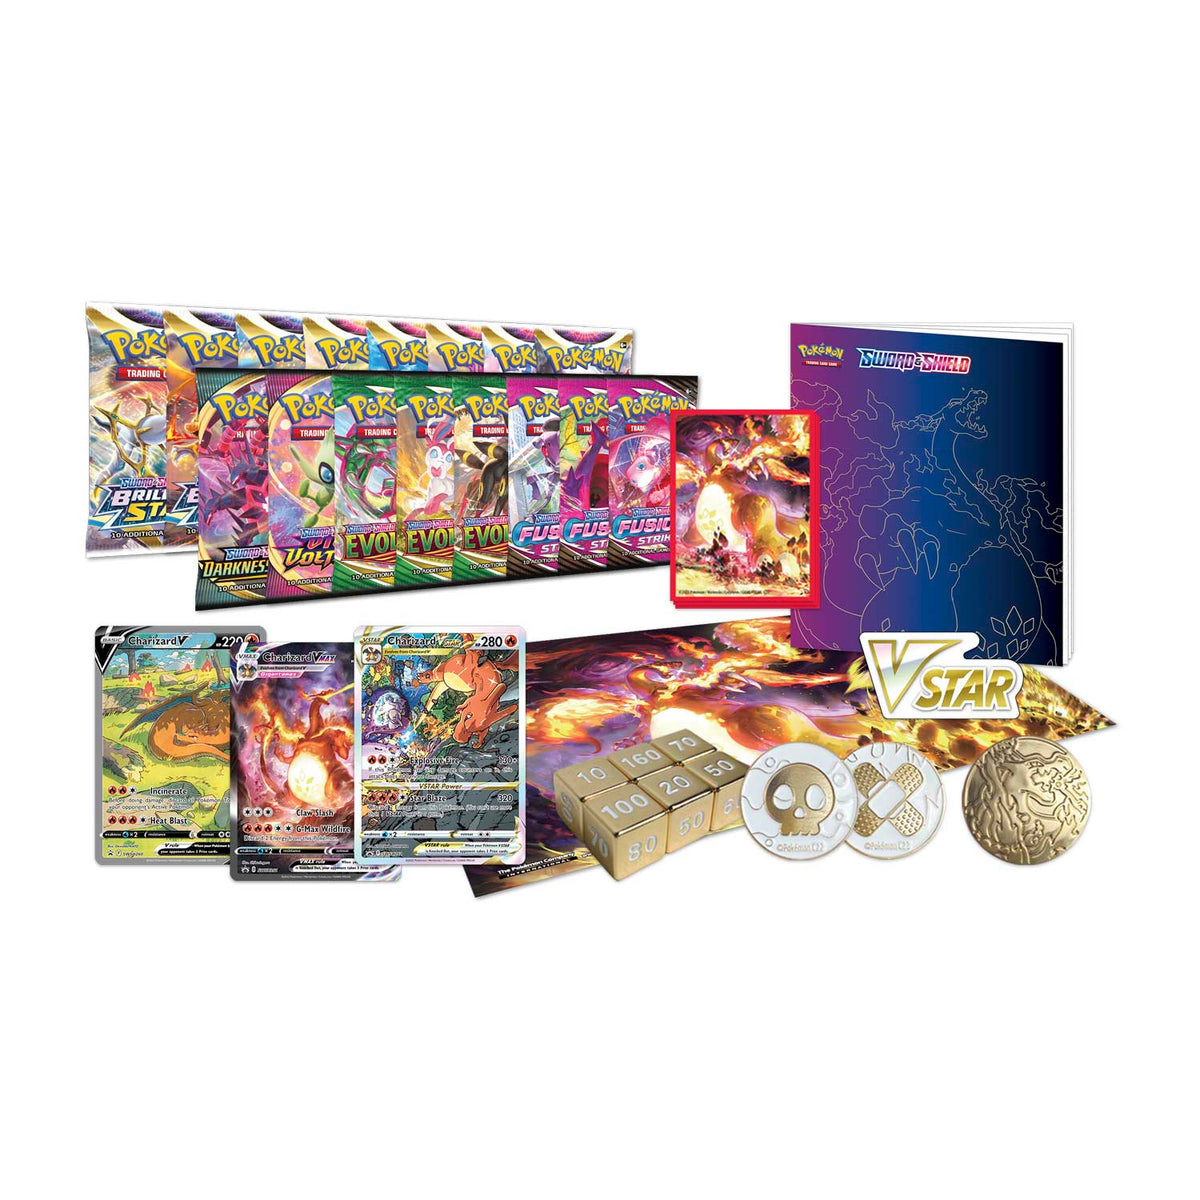 Pokemon TCG: Sword &amp; Shield Ultra Premium Collection &quot;Charizard&quot;-The Pokémon Company International-Ace Cards &amp; Collectibles